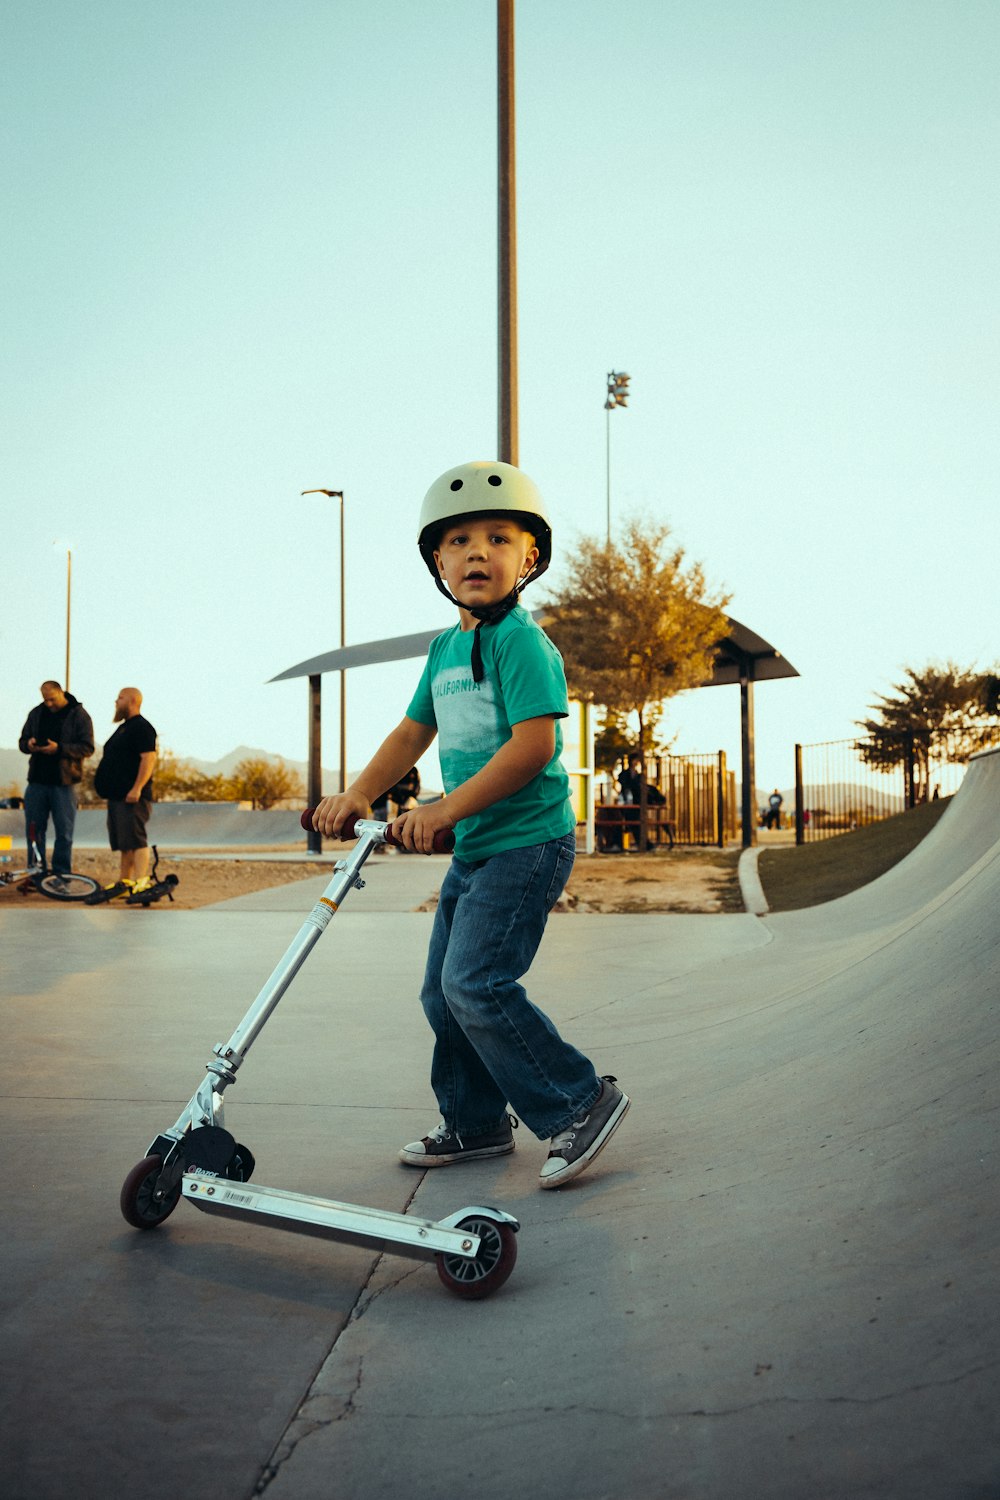 a young boy riding a scooter at a skate park